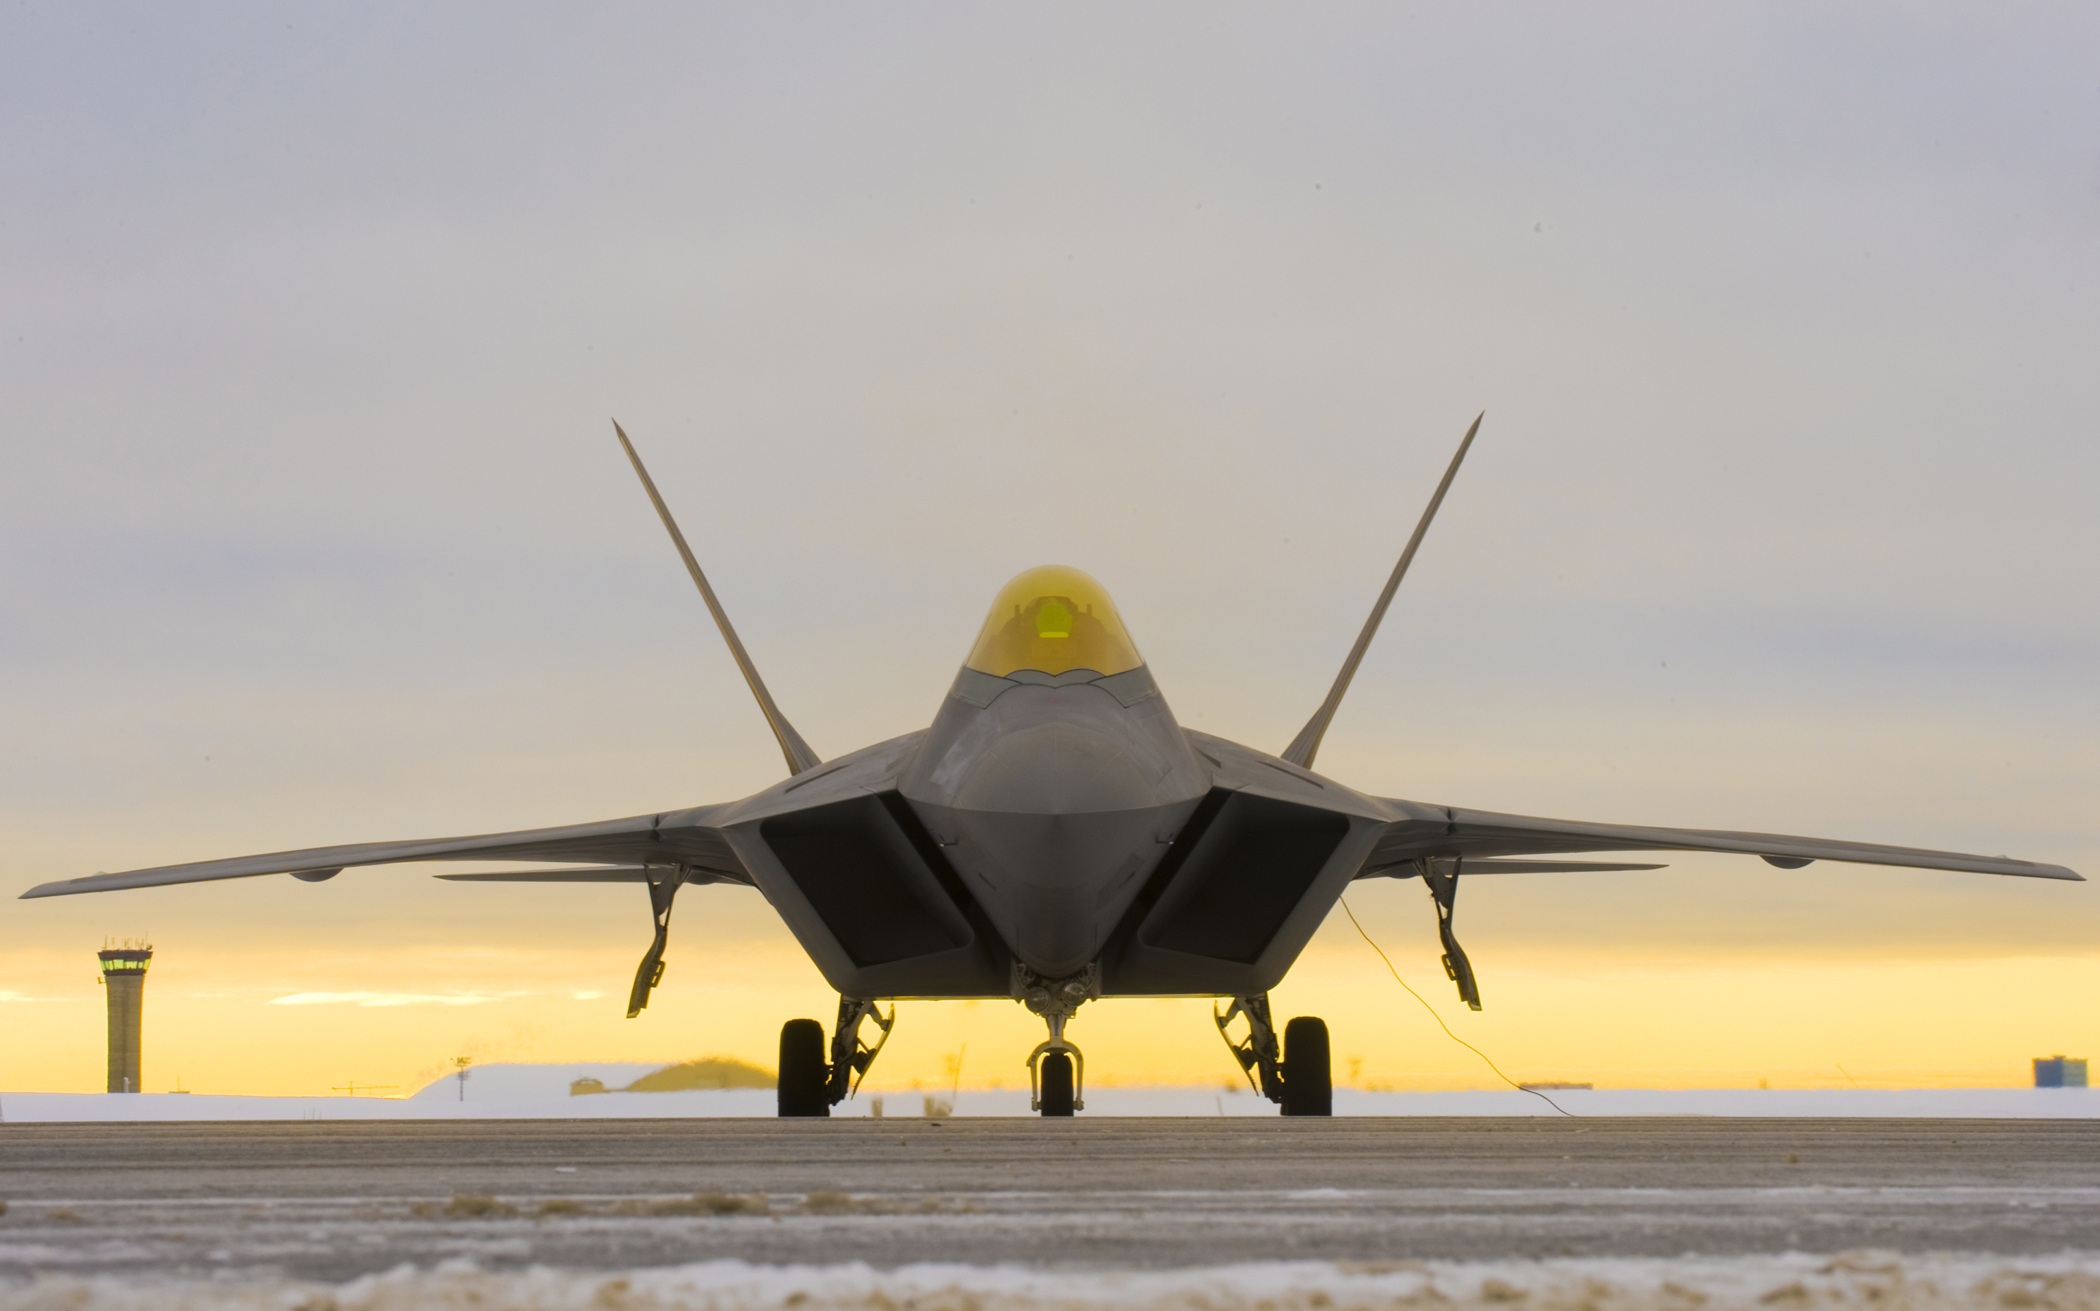 The F-22 Raptor celebrates its 25th birthday, the world's first fifth-generation fighter, at a cost of $66.7 billion in development